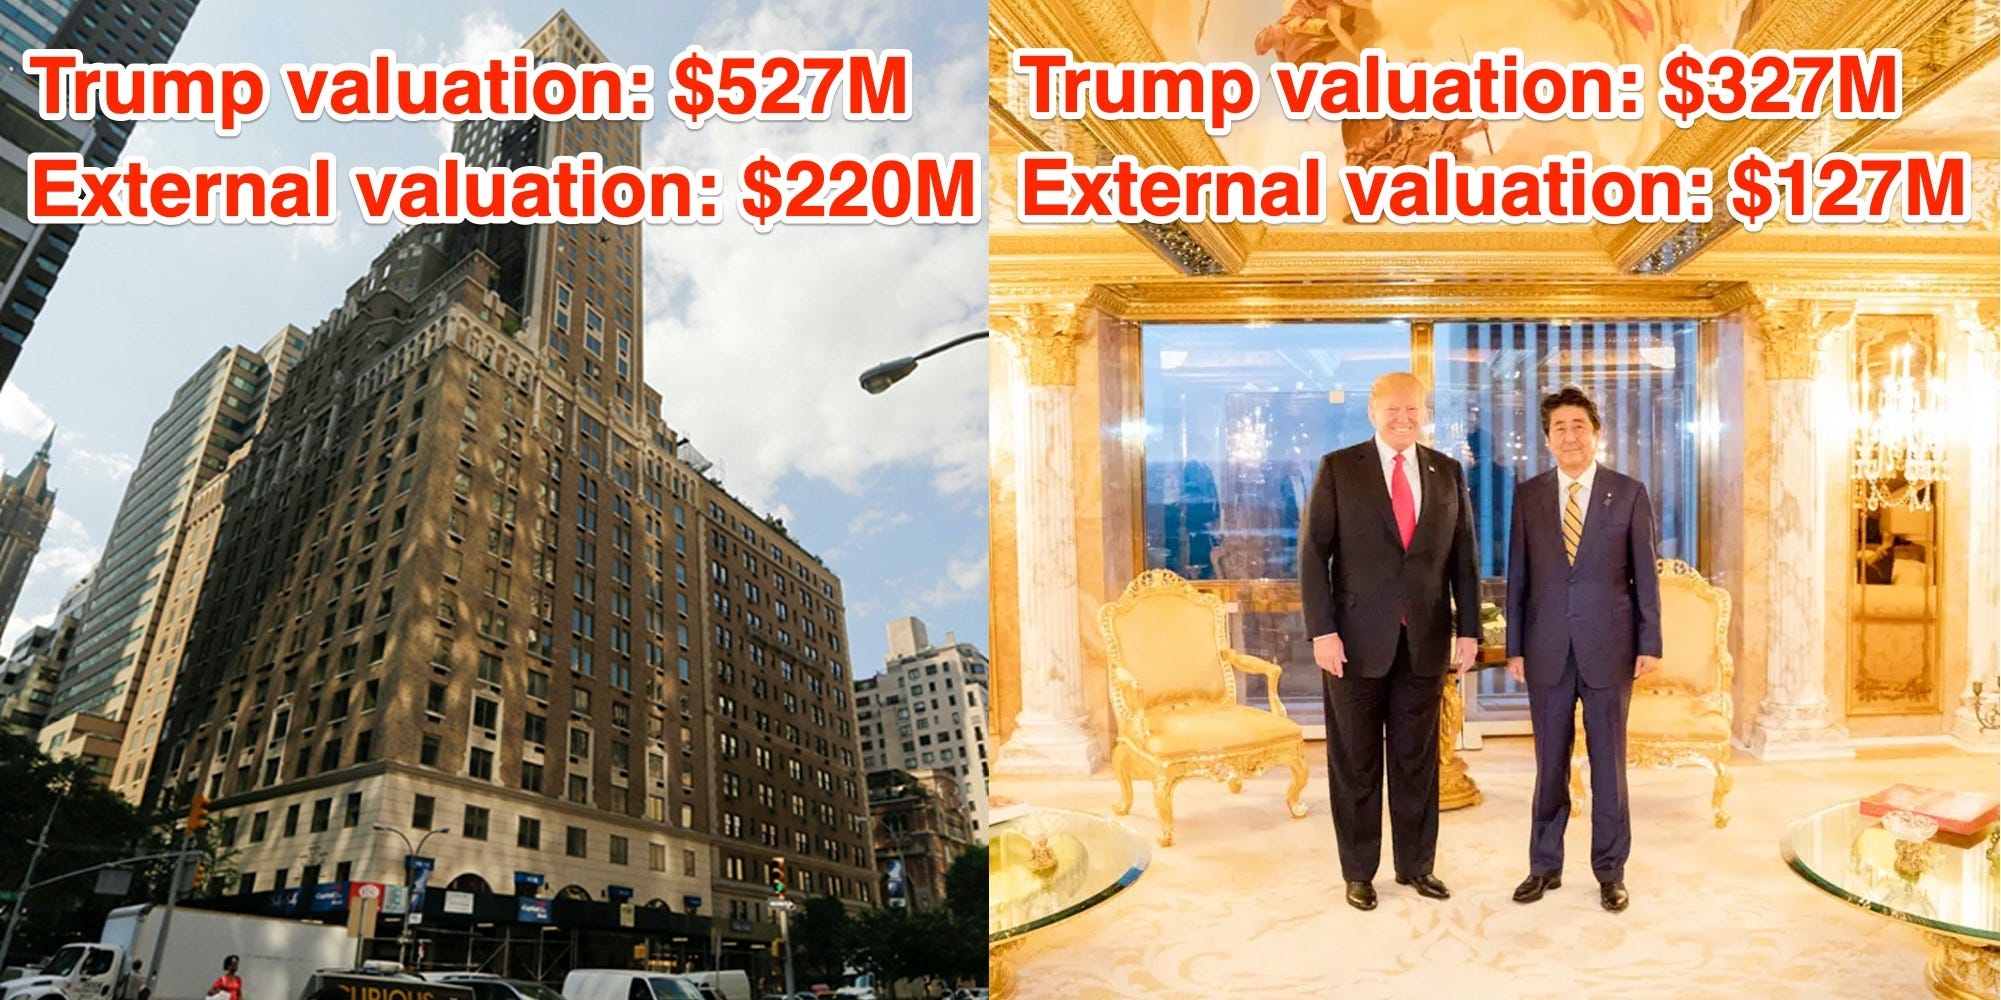 Trump properties and their values